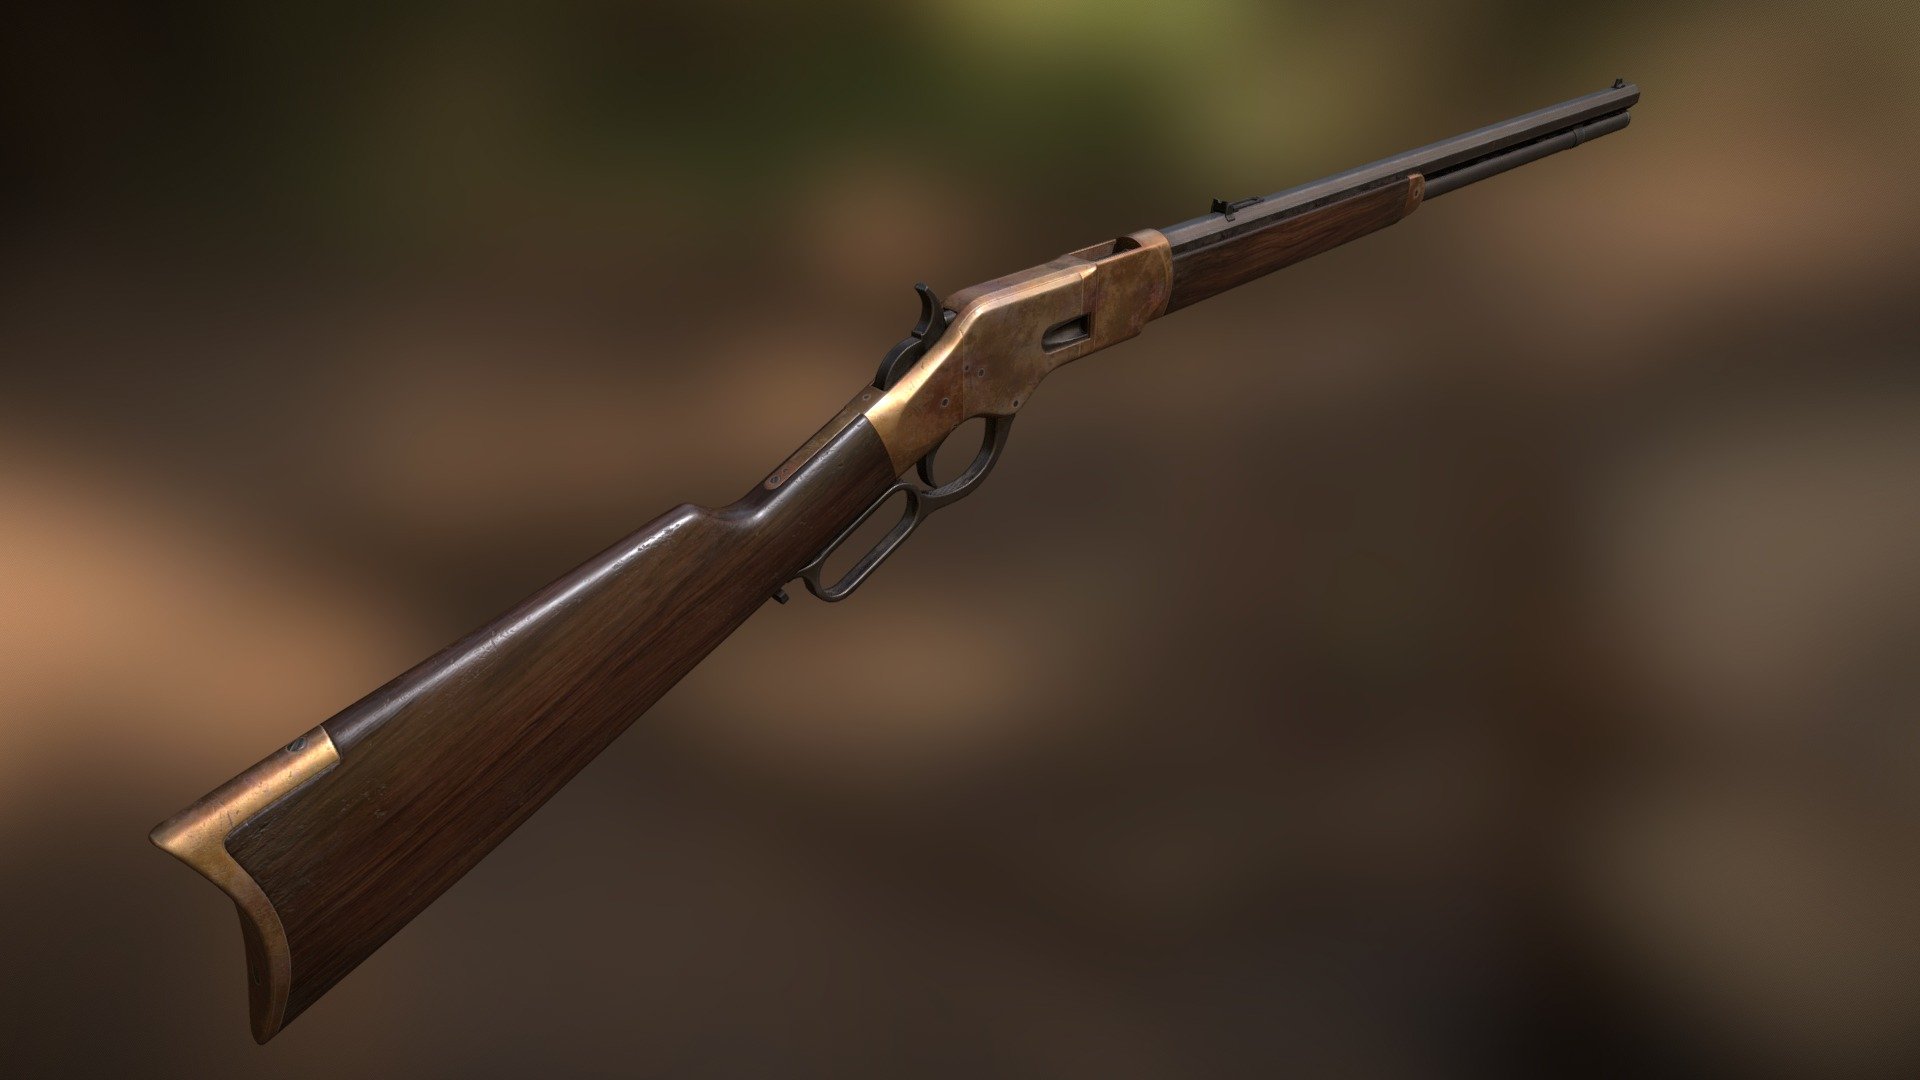 Played a lot of RDR2 and Hunt Showdown :D Here's a 3D model of an 1886 Winchester Yellowboy Rifle - 1886 Winchester Yellowboy Rifle - 3D model by cygerodias 3d model